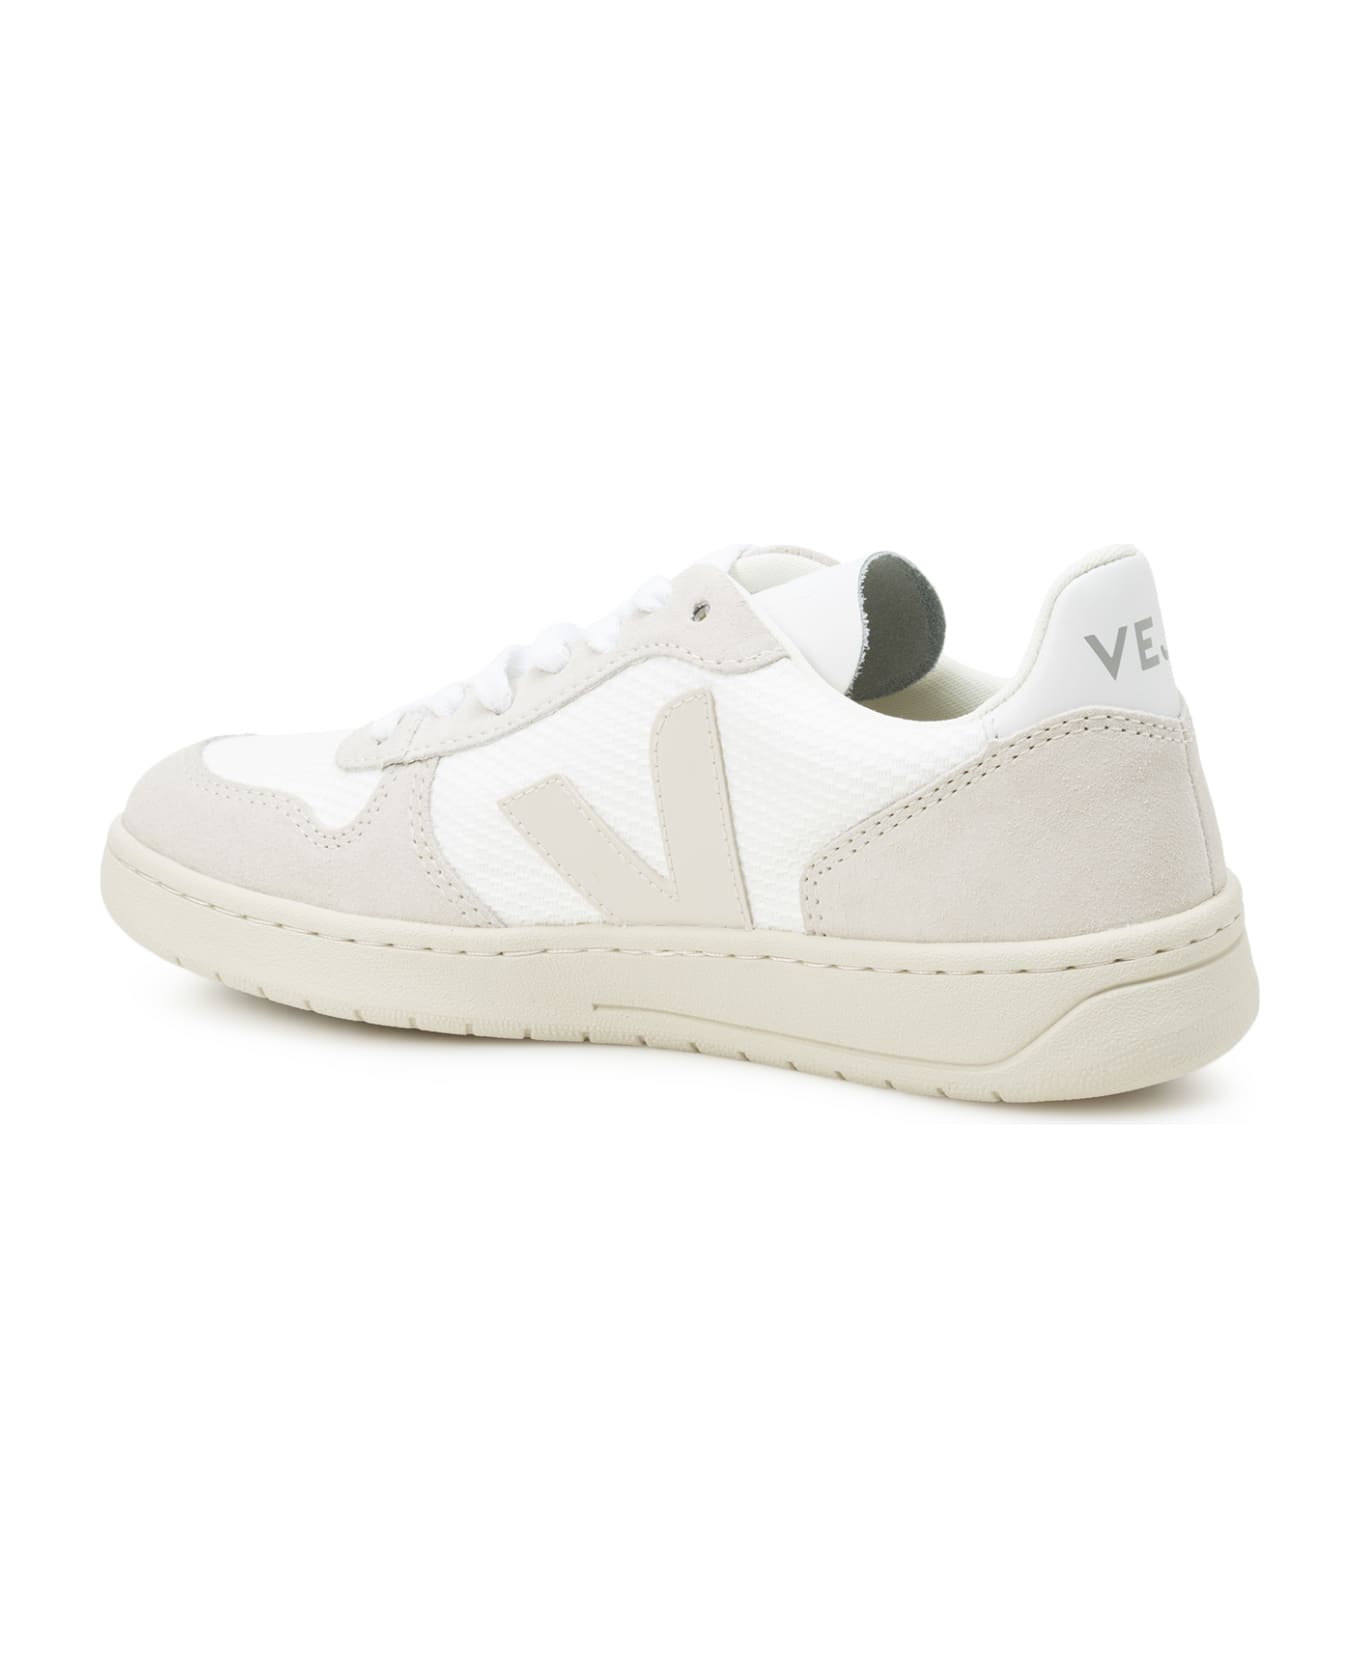 Veja Sneakers - White/natural pierre スニーカー